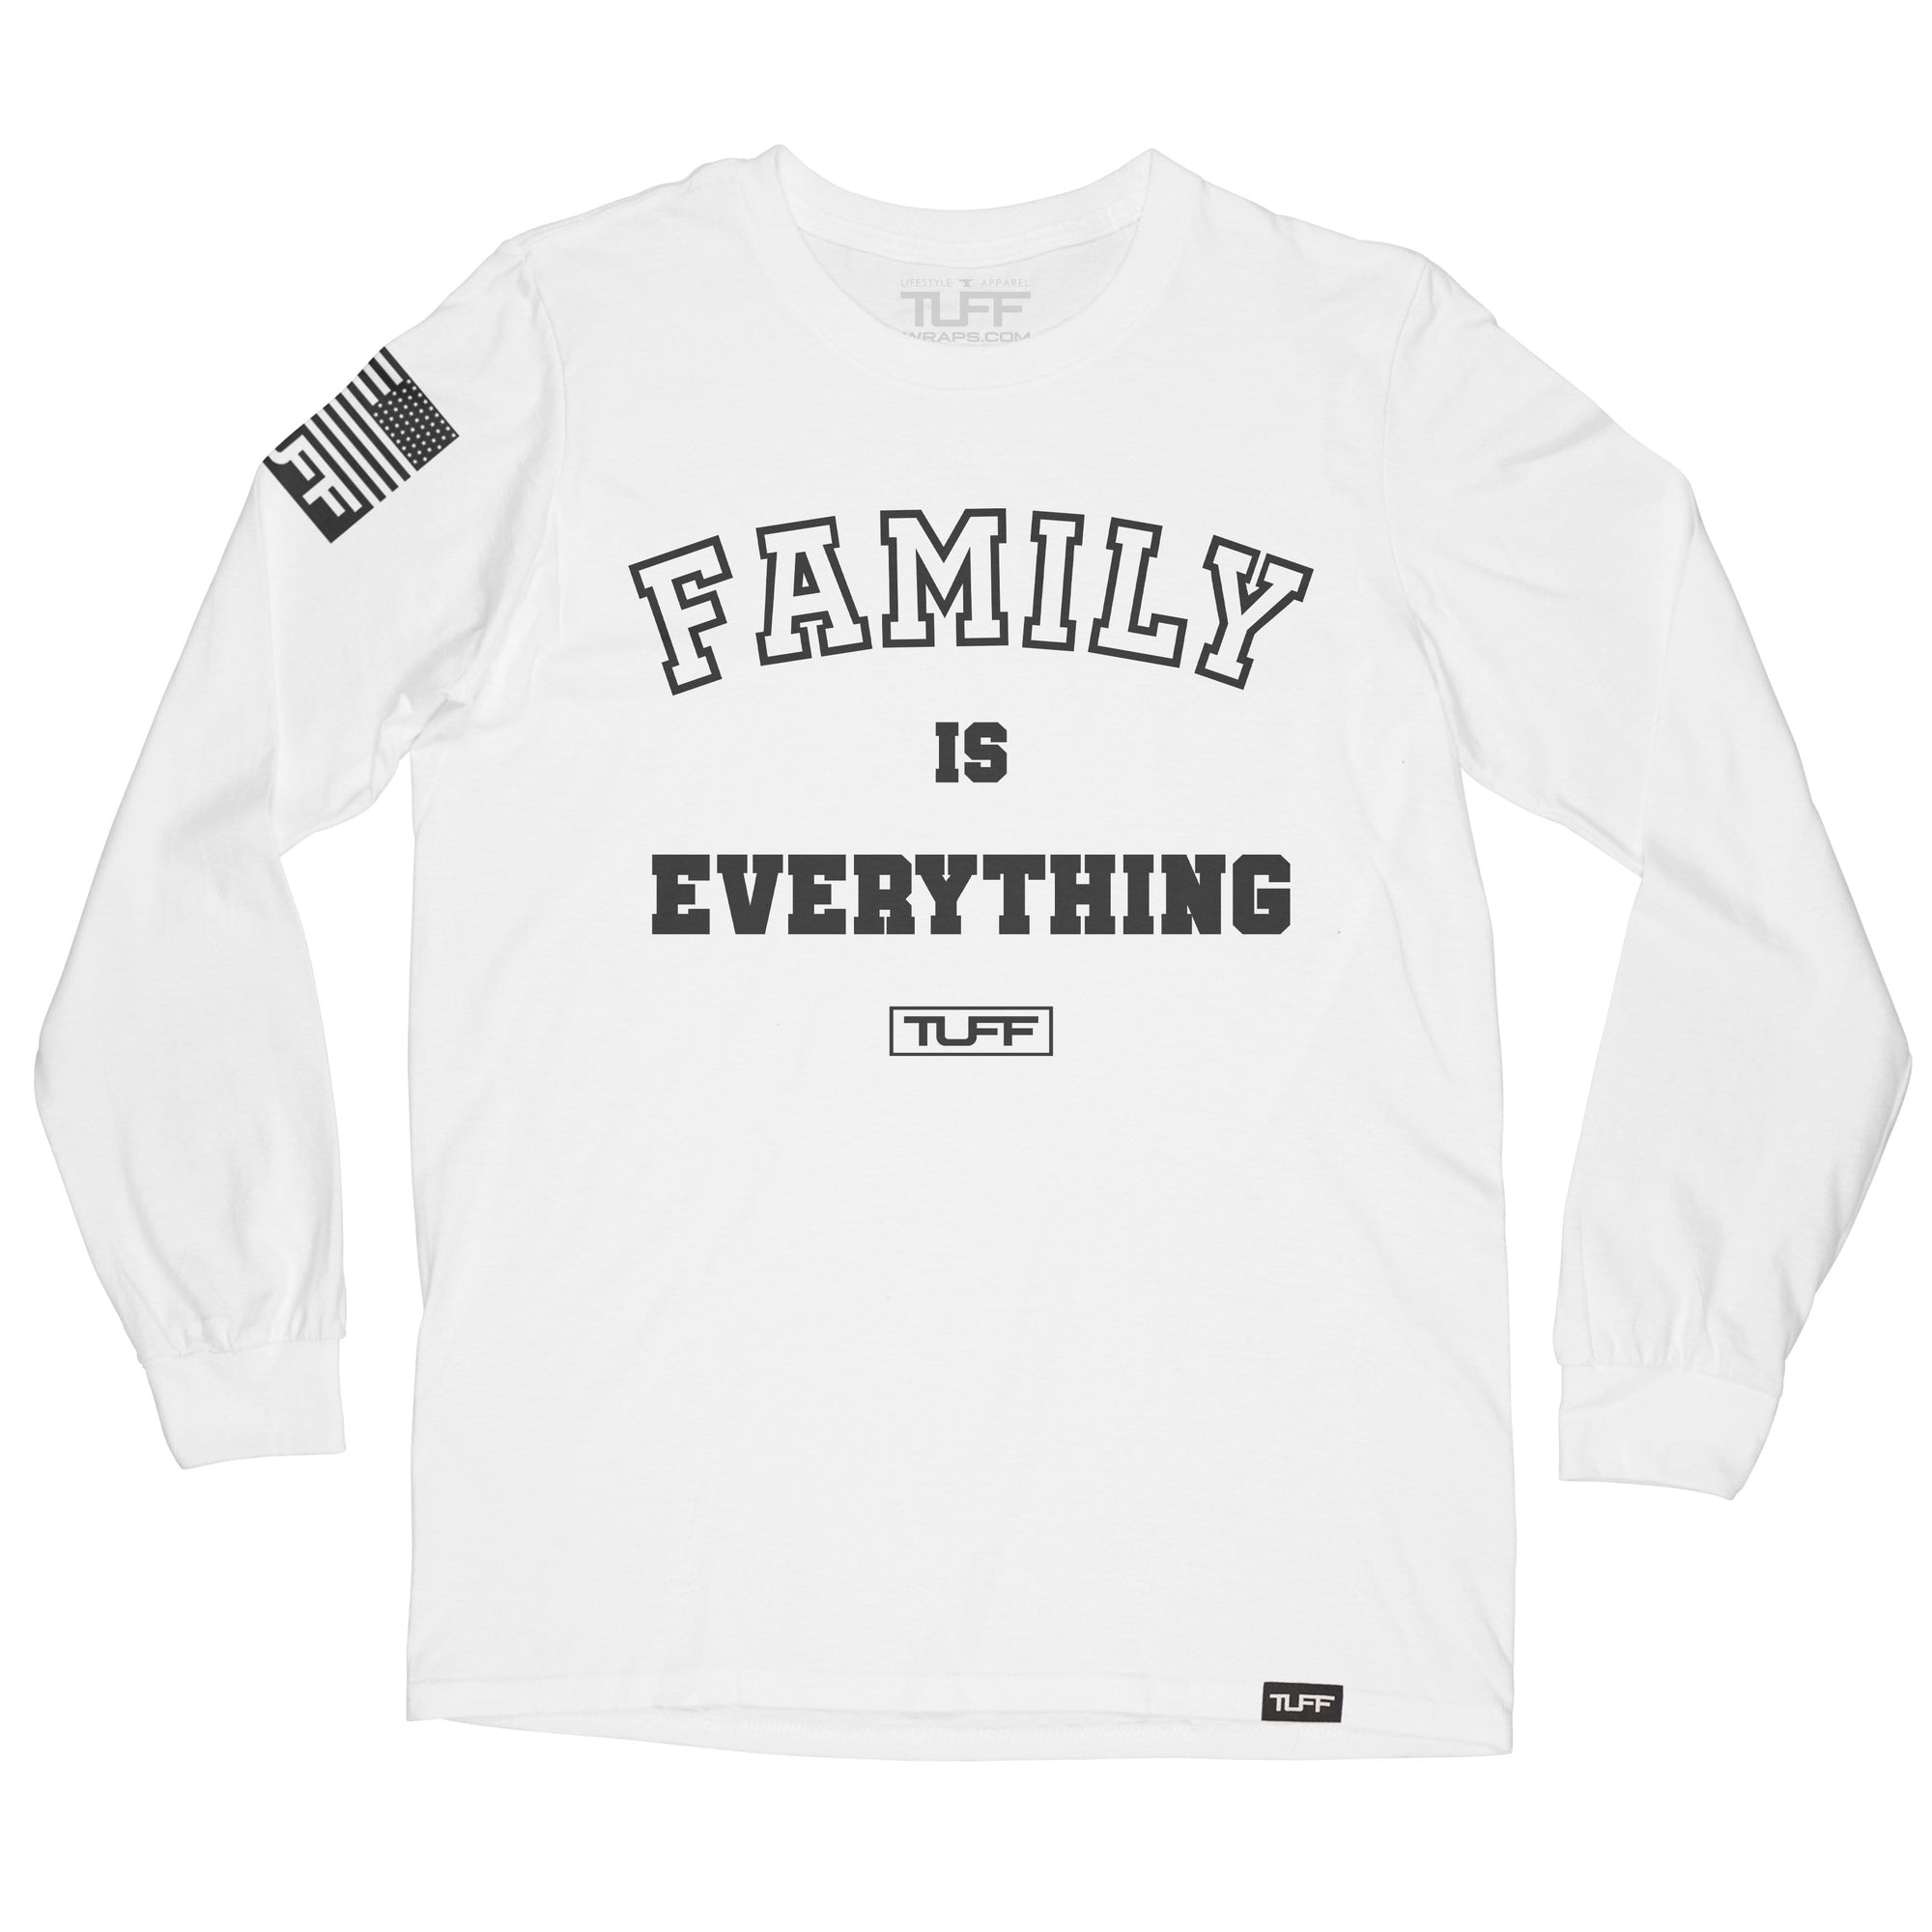 Family Is Everything Long Sleeve Tee S / White TuffWraps.com